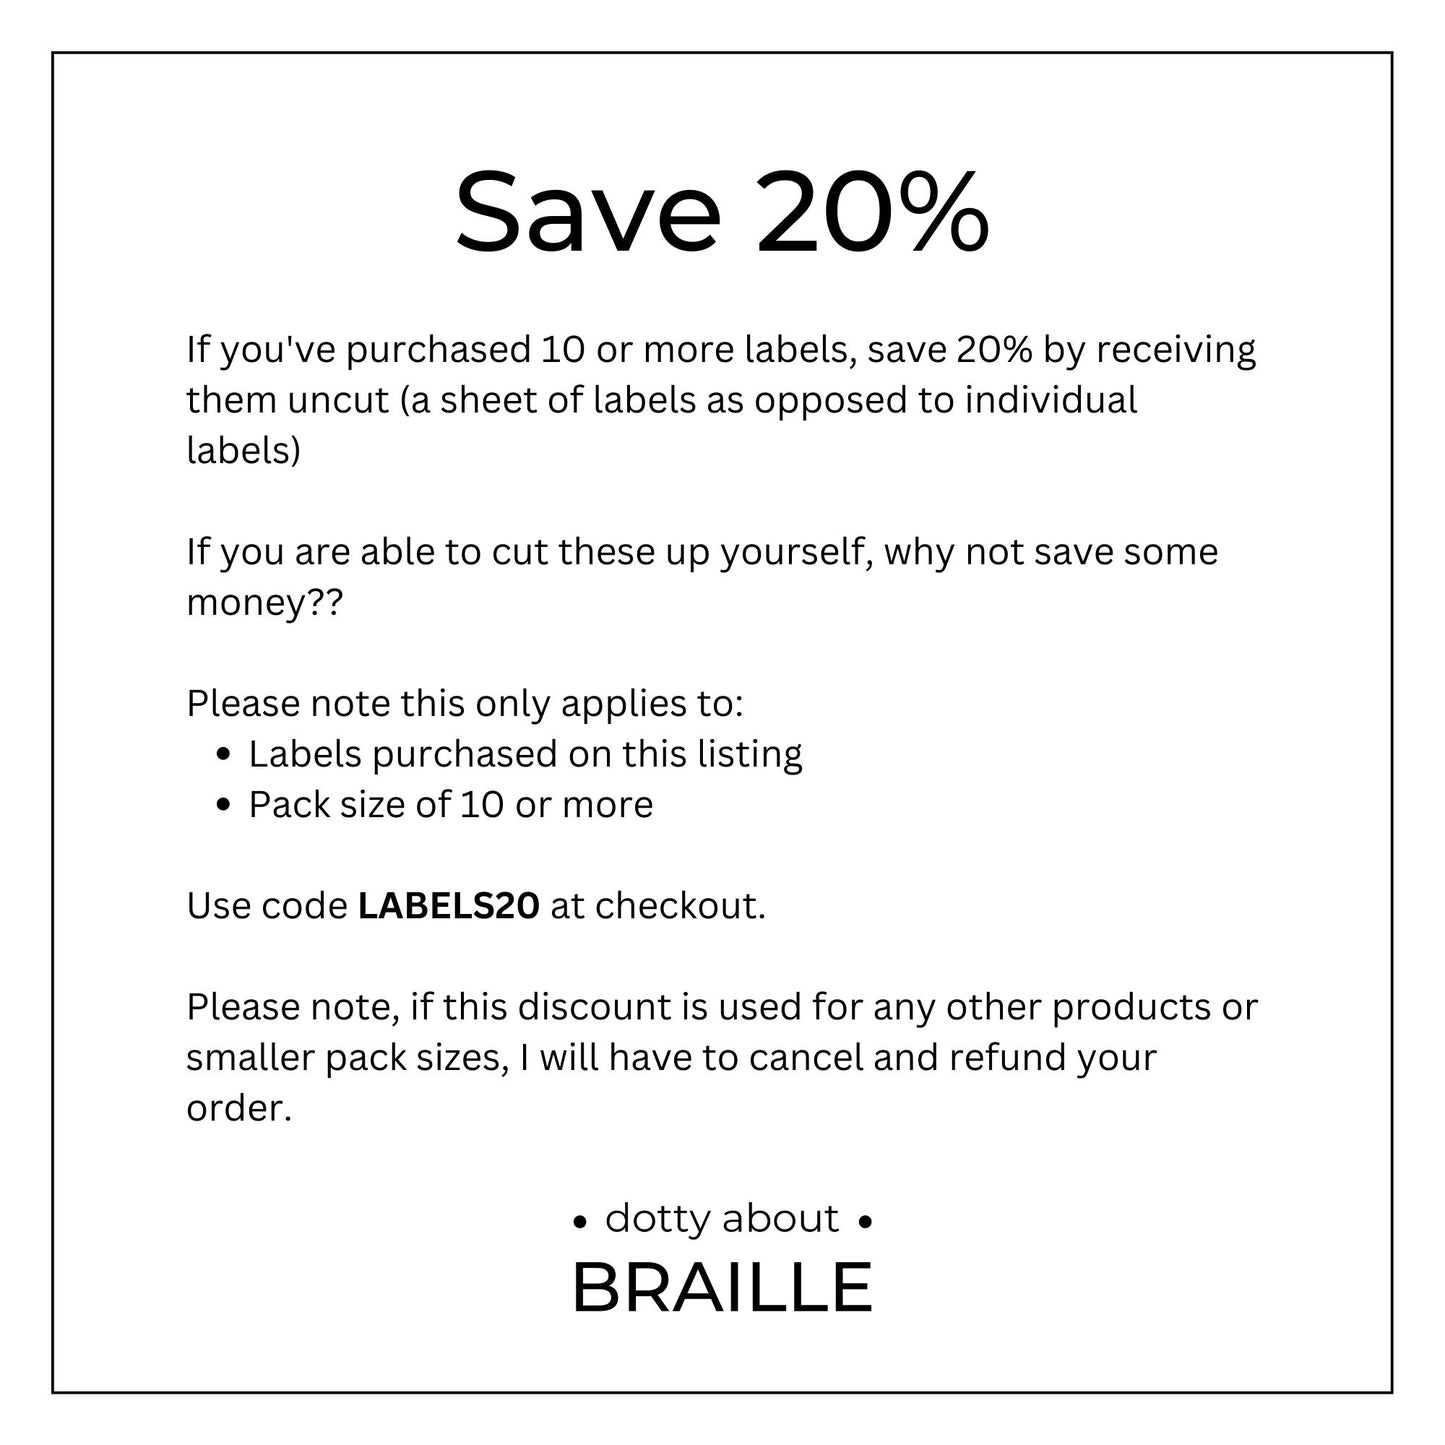 If you&#39;ve purchased 10 or more labels, save 20% by receiving them uncut (a sheet of labels as opposed to individual labels) Please note this only applies to: Labels purchased on this listing Pack size of 10 or more. Use code LABELS20 at checkout.